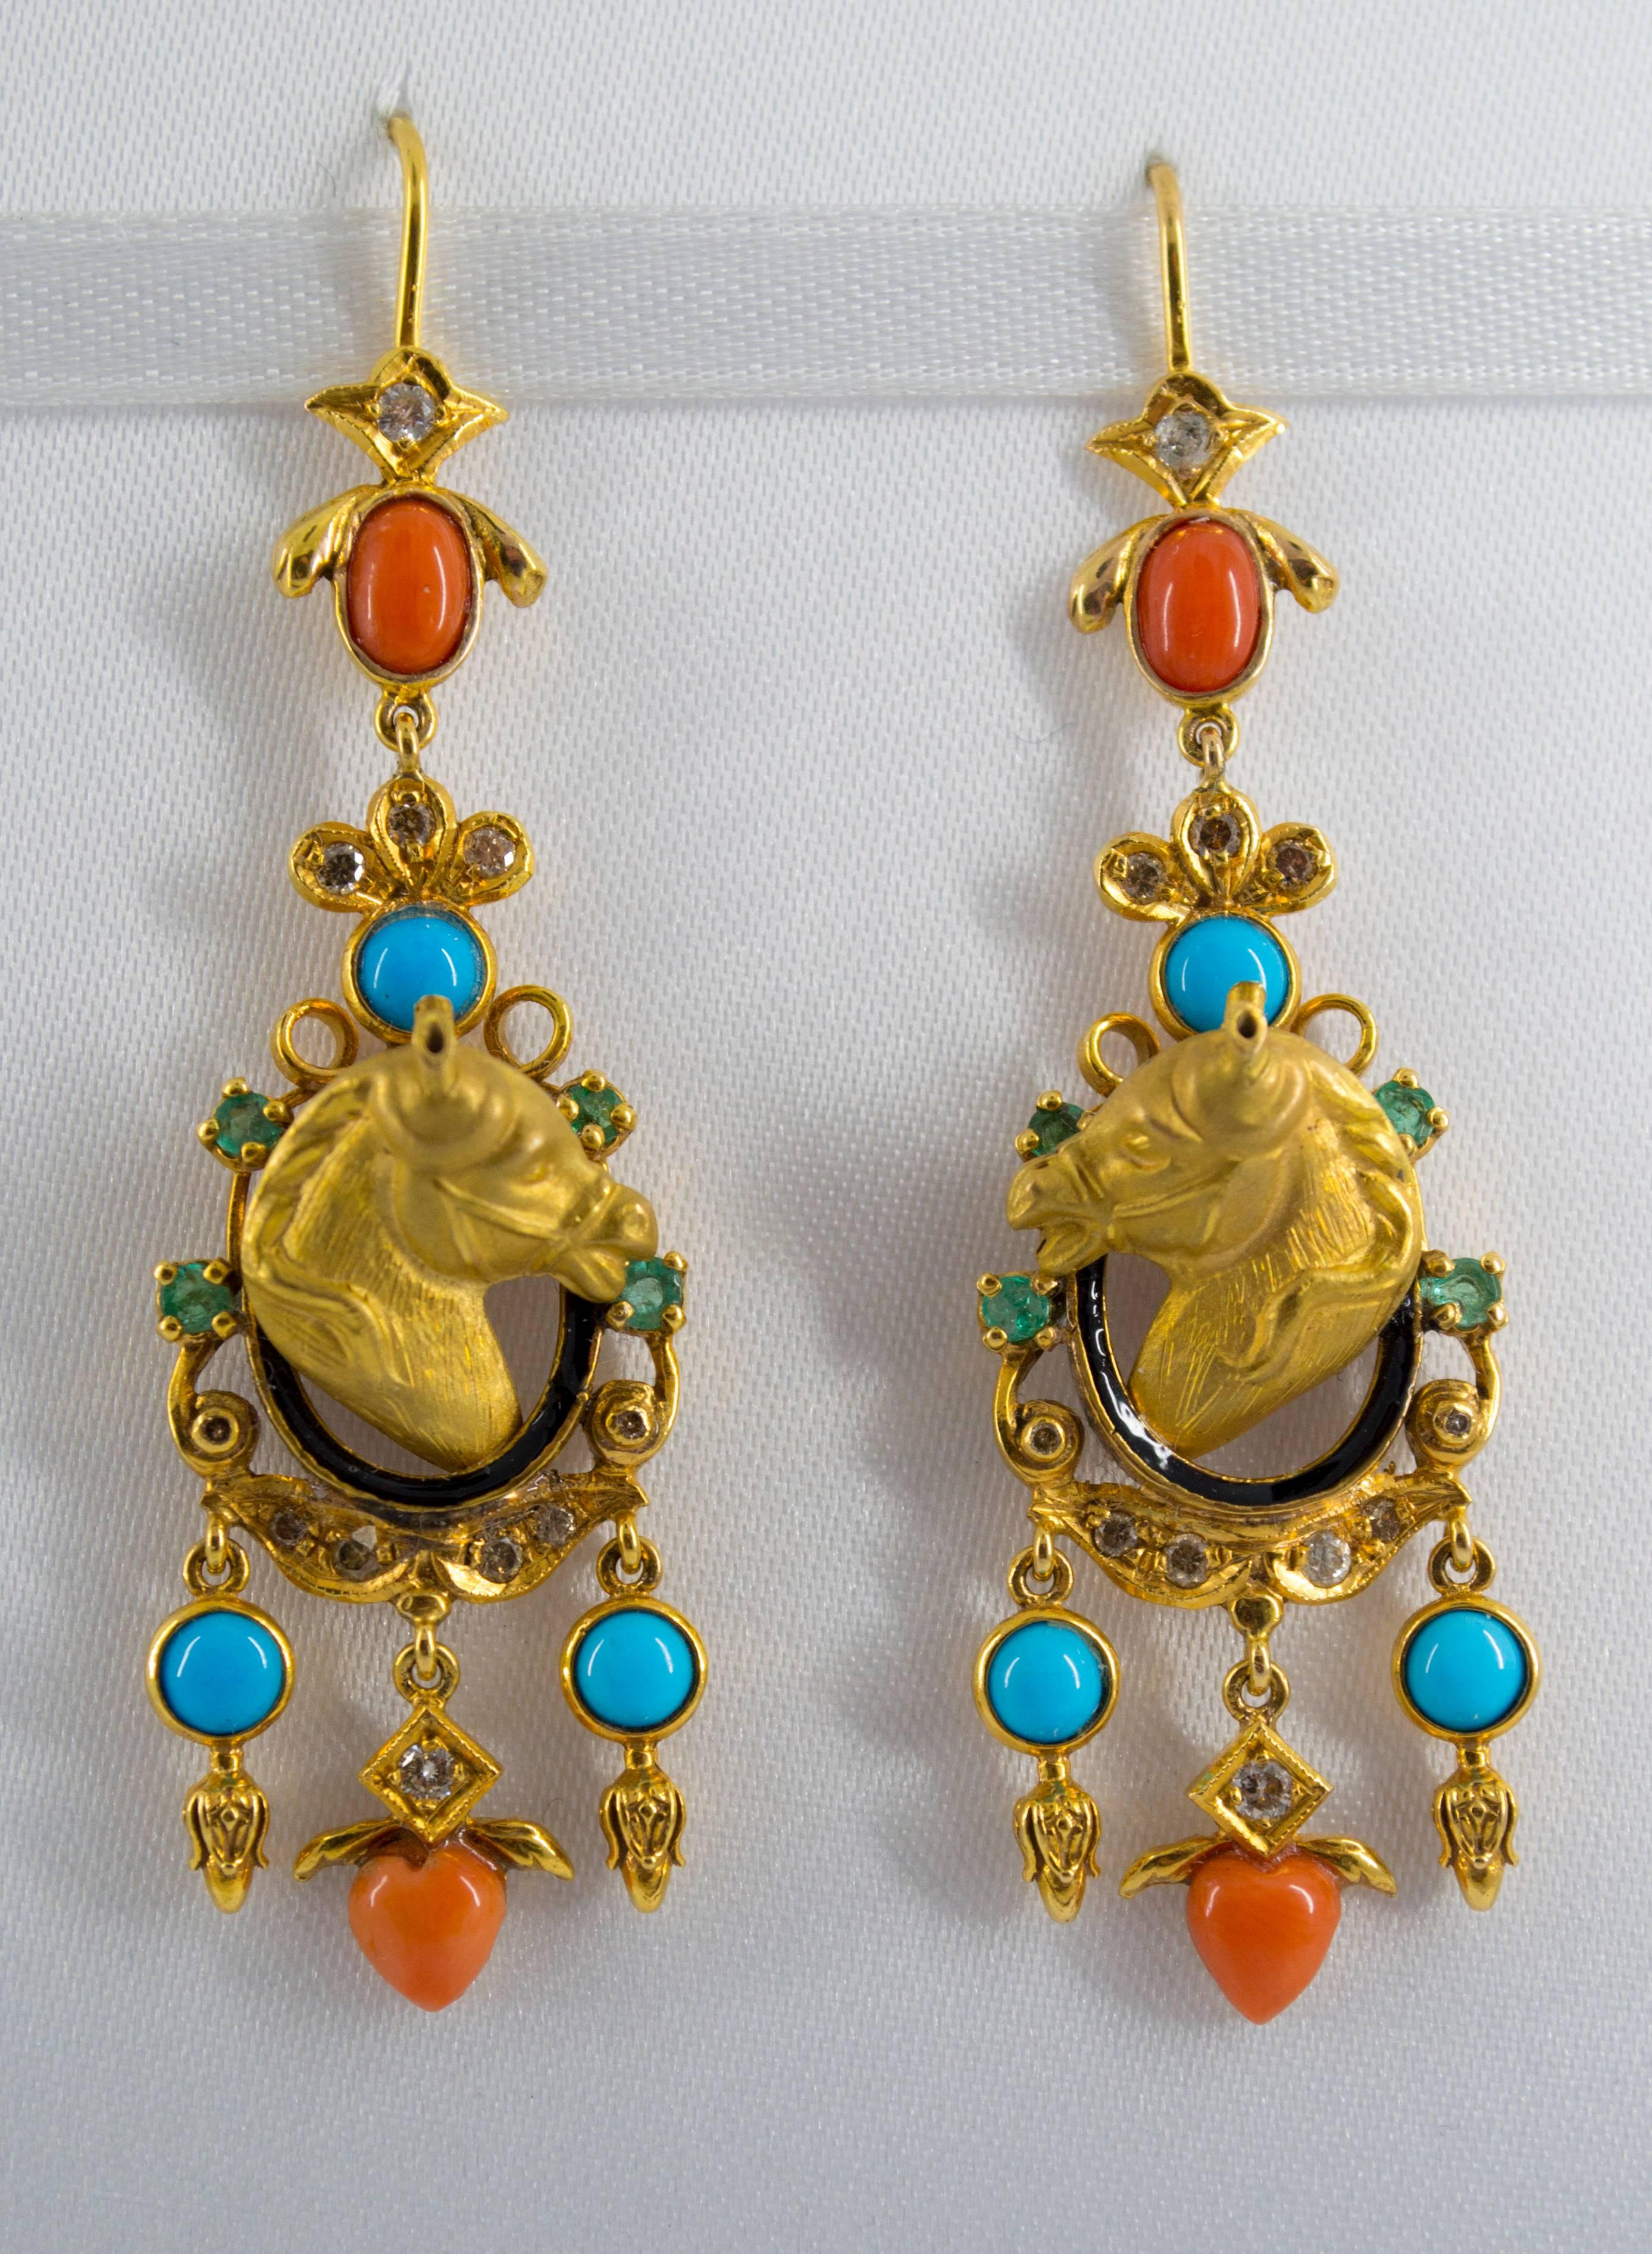 These earrings are made of 14K Yellow Gold.
They have Coral, Turquoise, 0.40 Carats of Emeralds and 0.50 Carats of White Diamonds.
These earrings are part of the animal collection, the result of the observation of nature and its inhabitants made by